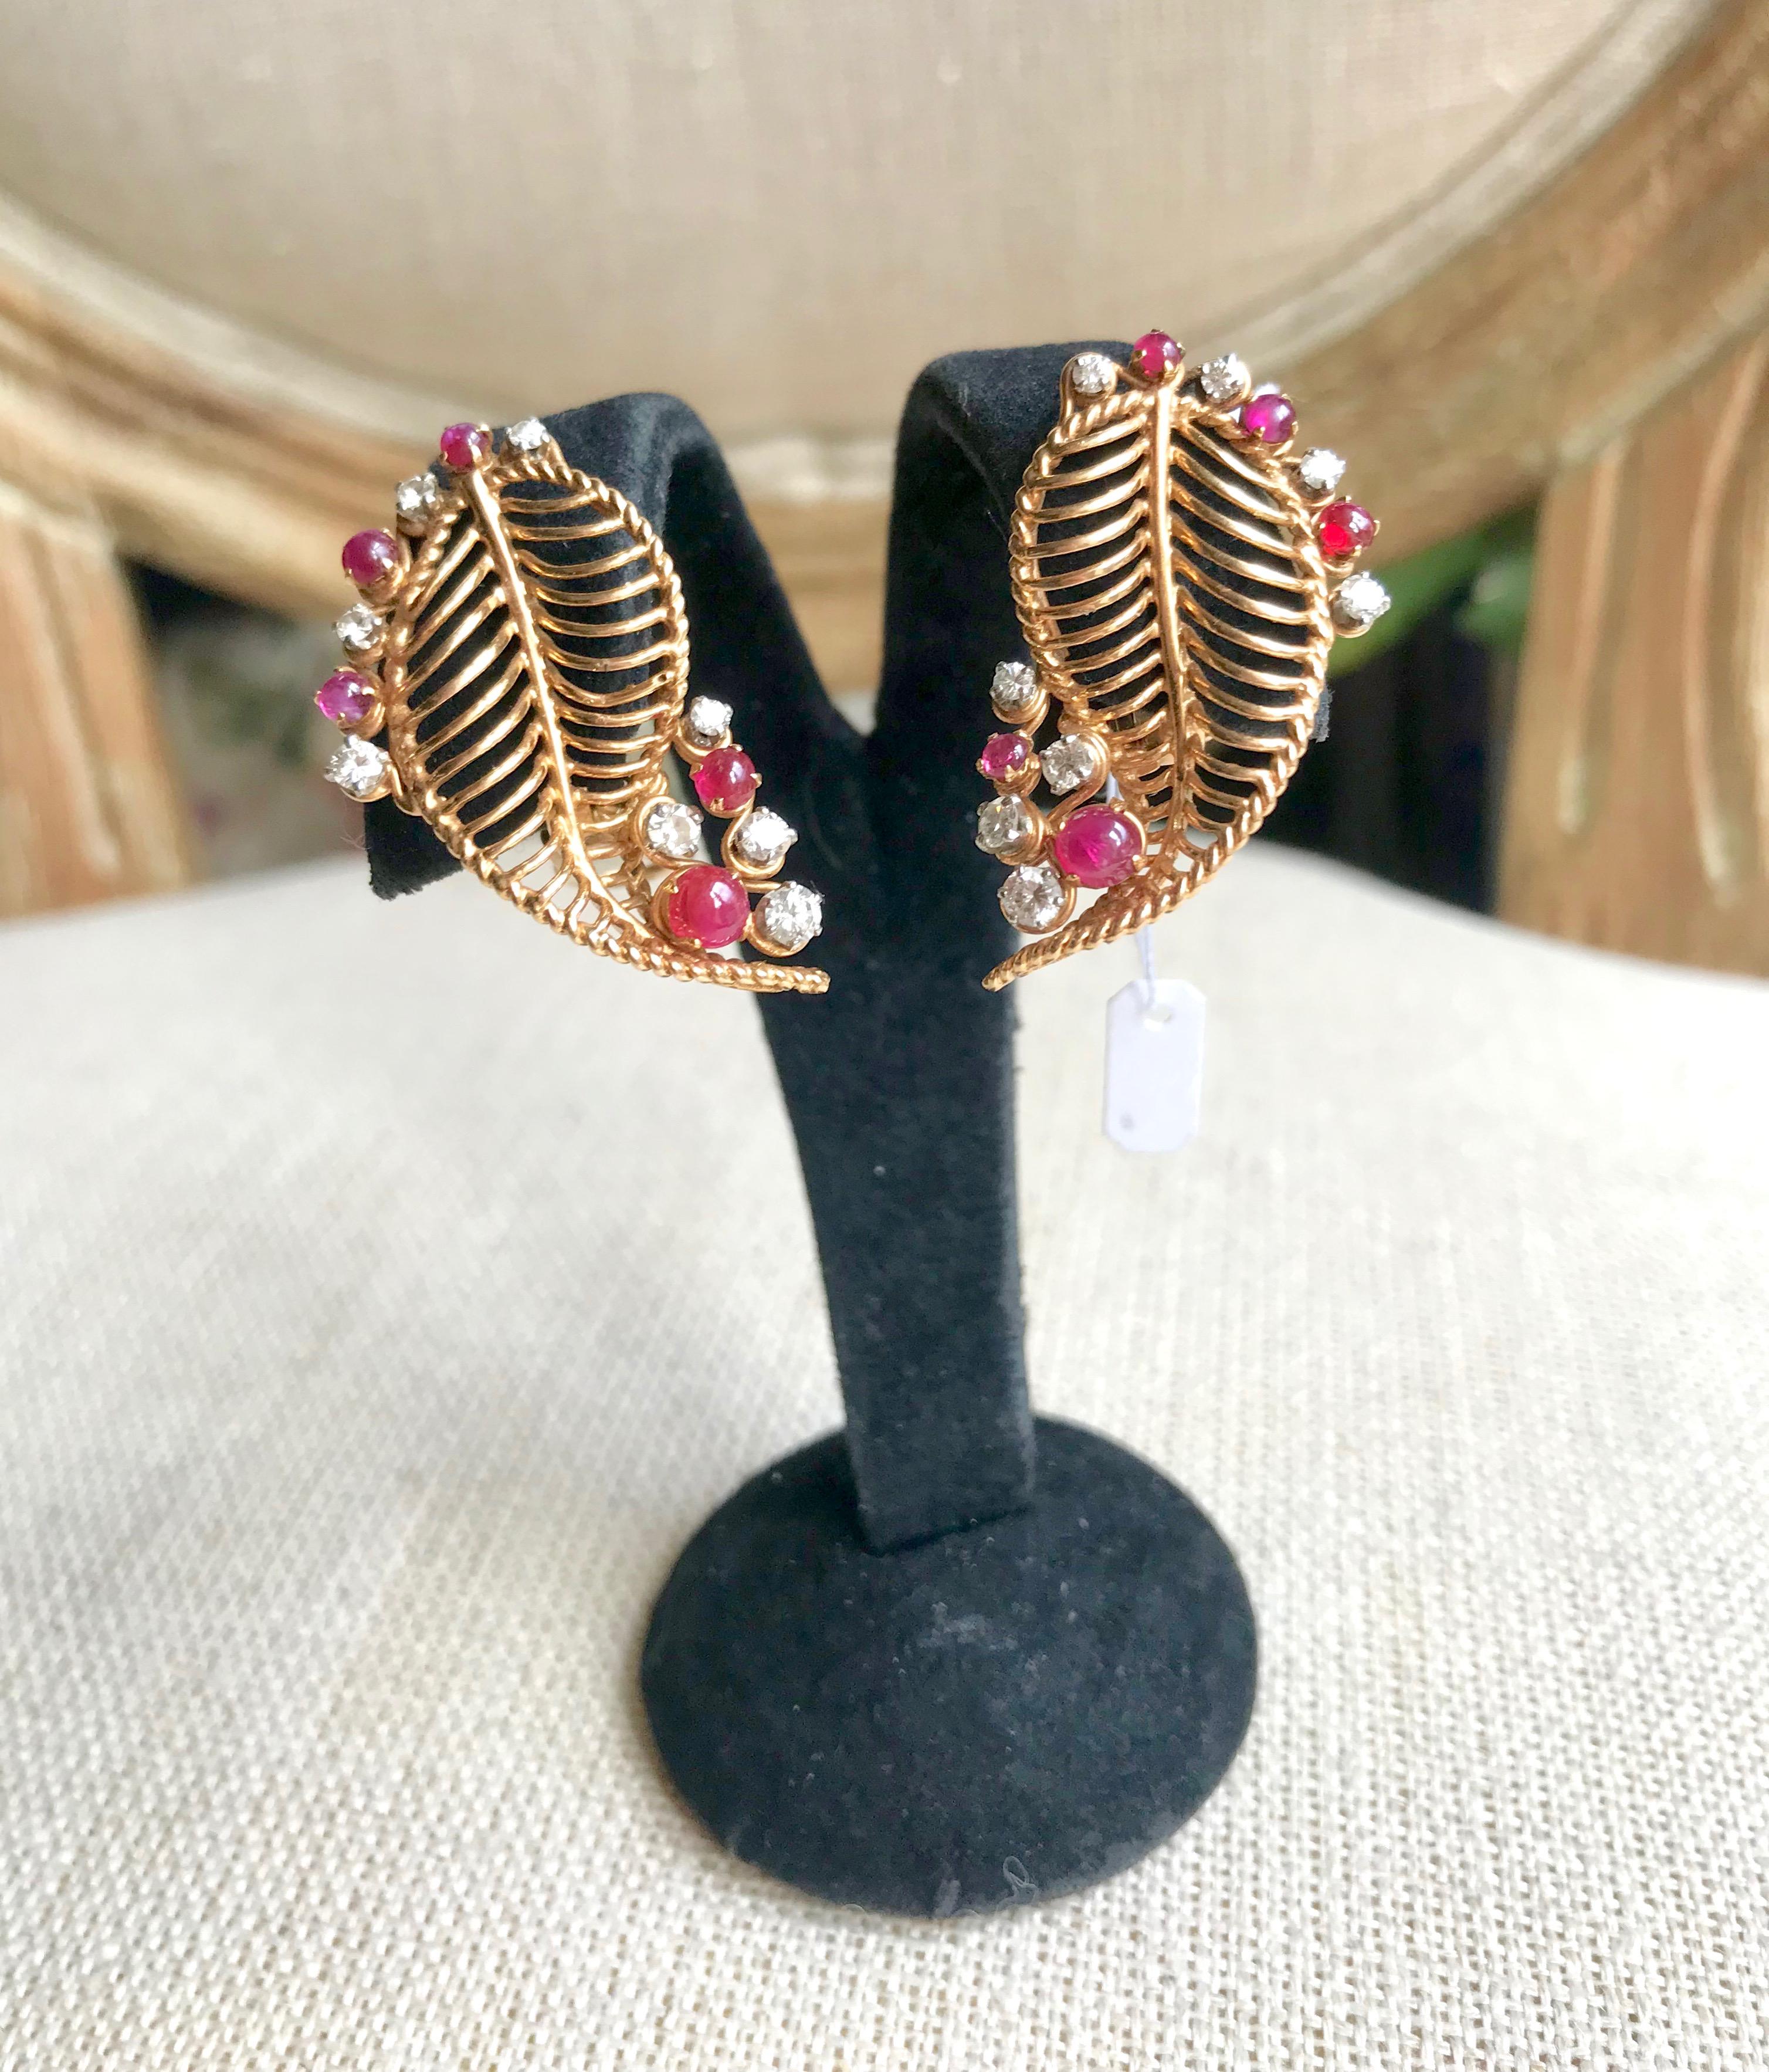 Vintage Earrings Circa 1950 in 18 Carat yellow Gold, Cabochon Rubies and Diamonds. Earrings for pierced Ears representing Leaves each holding 8 Diamonds and 5 Cabochon Rubies. Period around 1950 
Gross weight: 13.1 g 
Length 3.5 cm